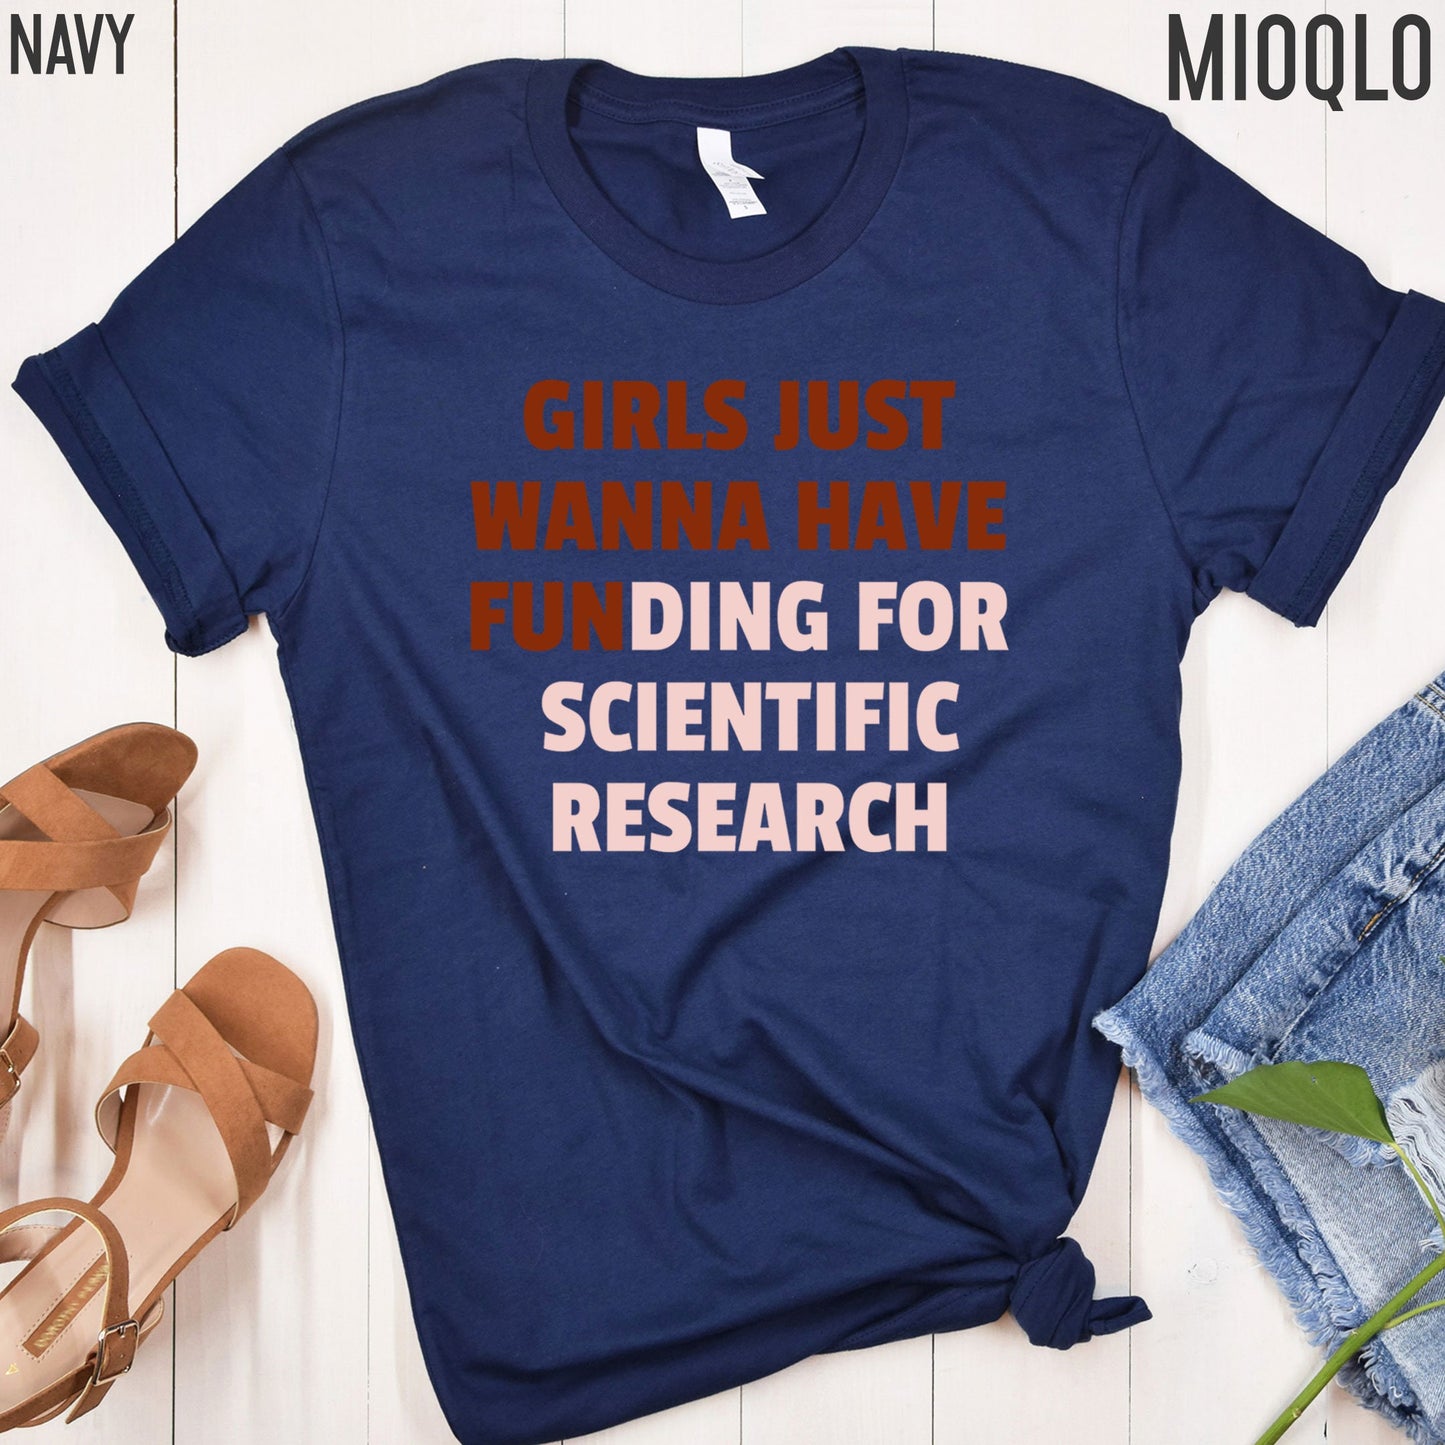 Girls Just Wanna Have Funding For Scientific Research, Science March for Science PhD Professor Teacher Gift, Girl Scientist Future Doctors